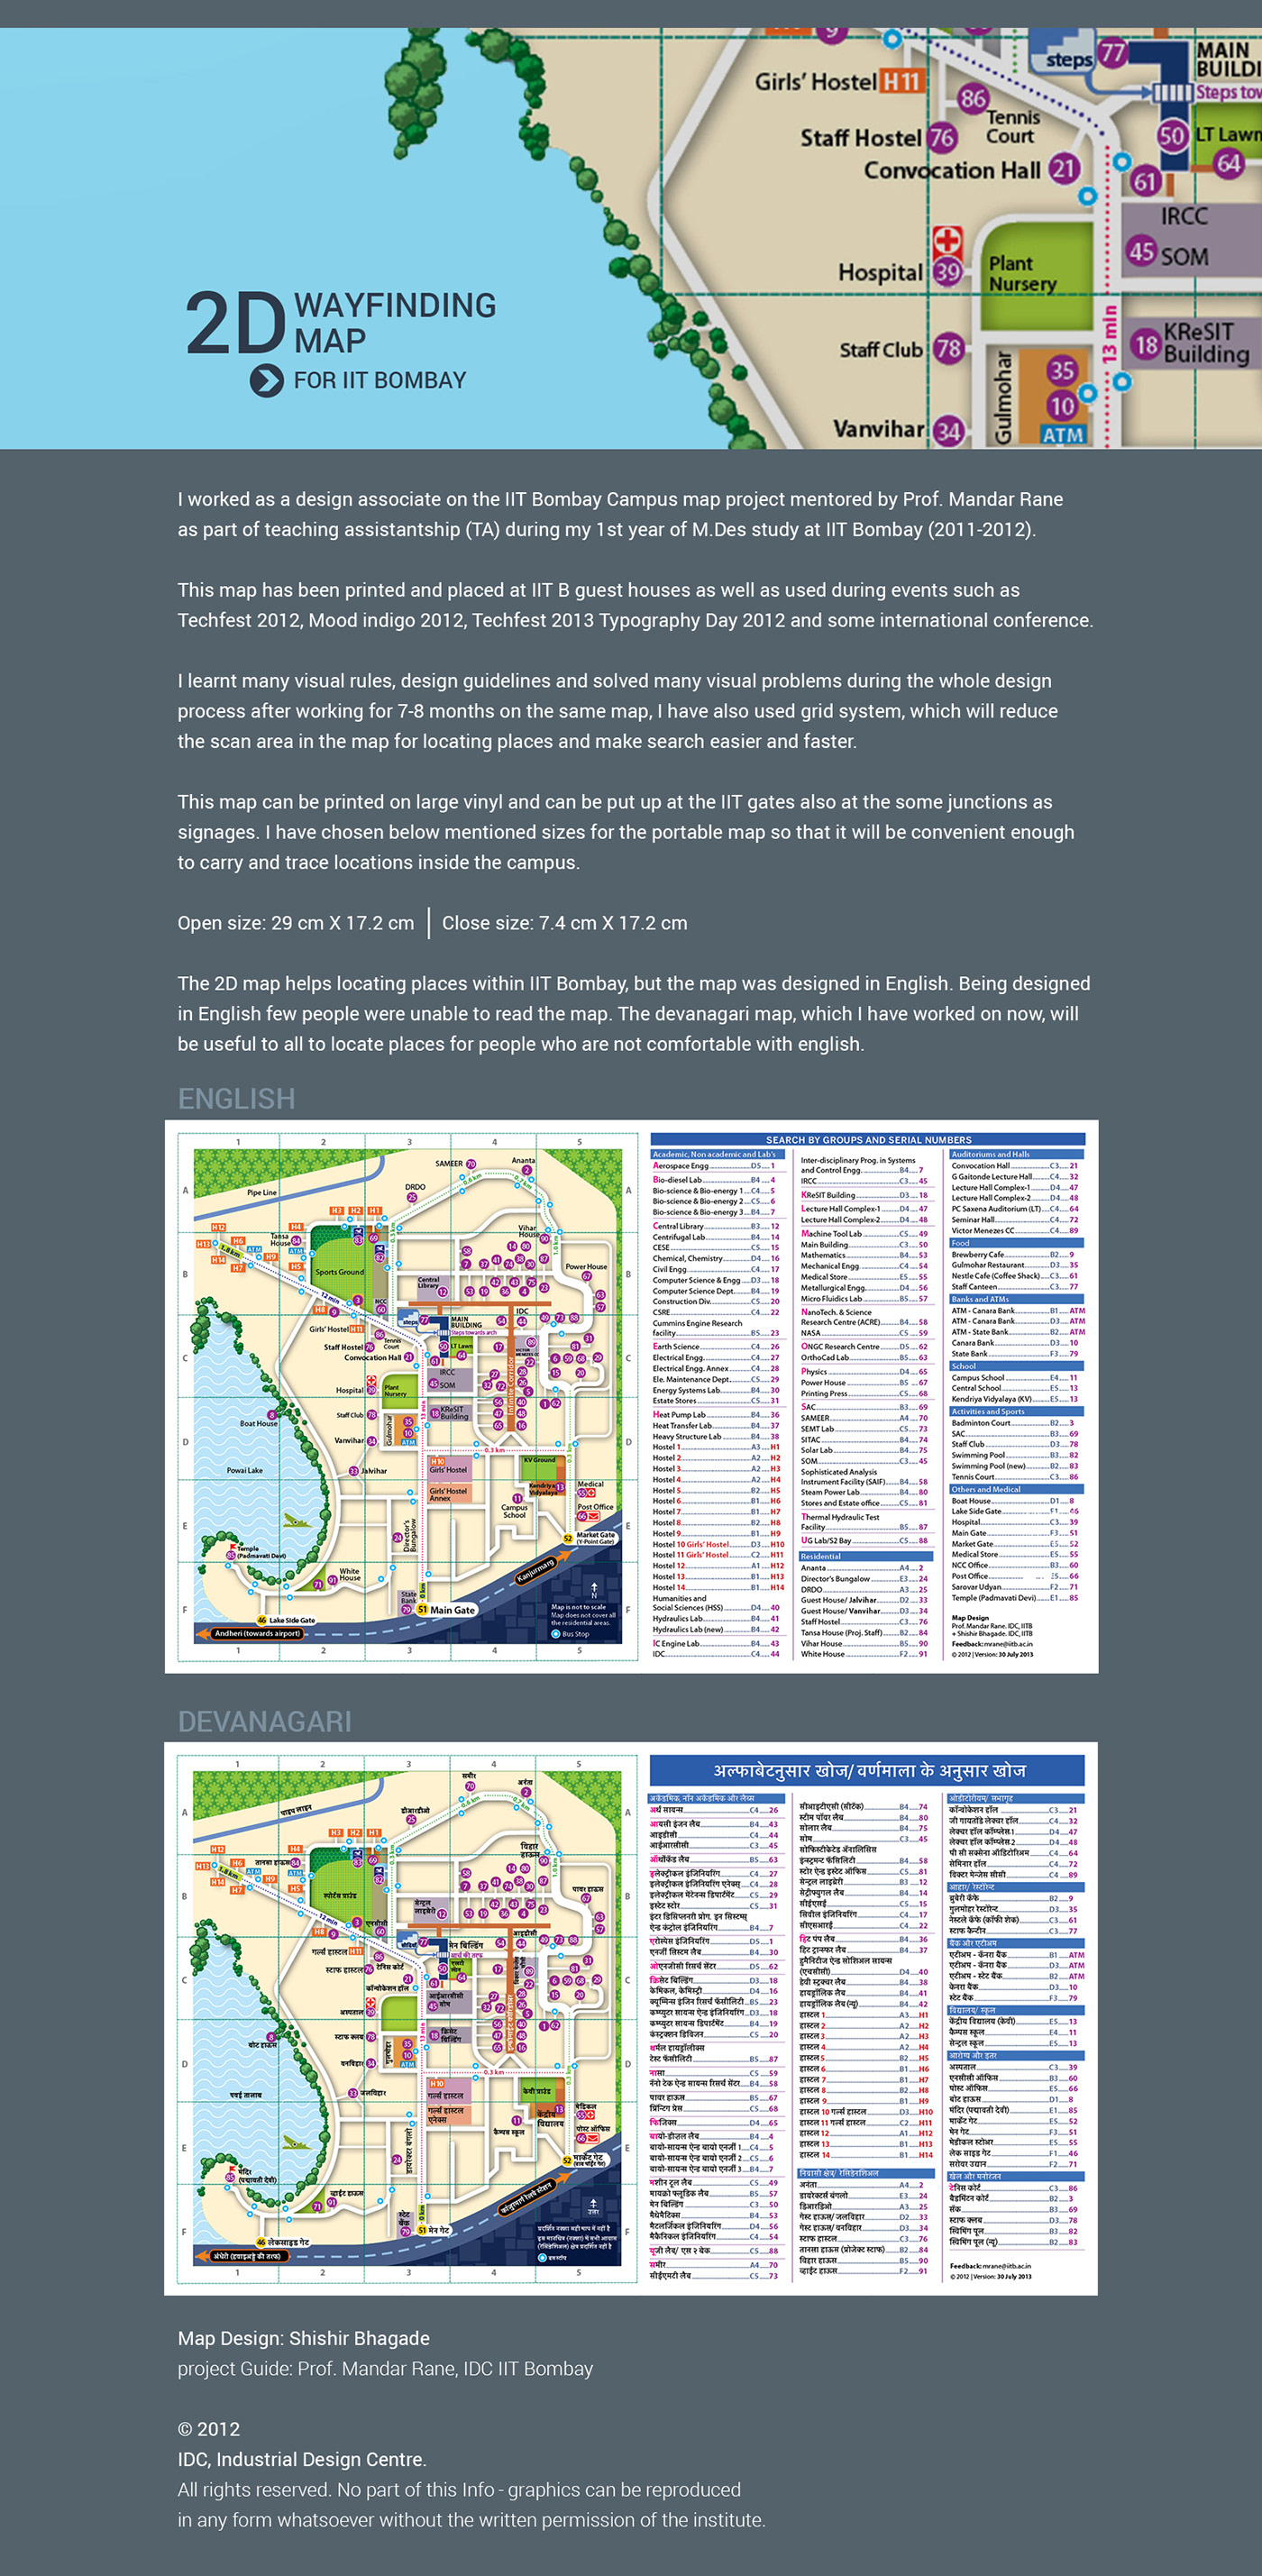 design of the IIT Bombay Campus map iit Bombay campus map Shishir Bhagade 2D map  Informative 2D map Way Finding institute map